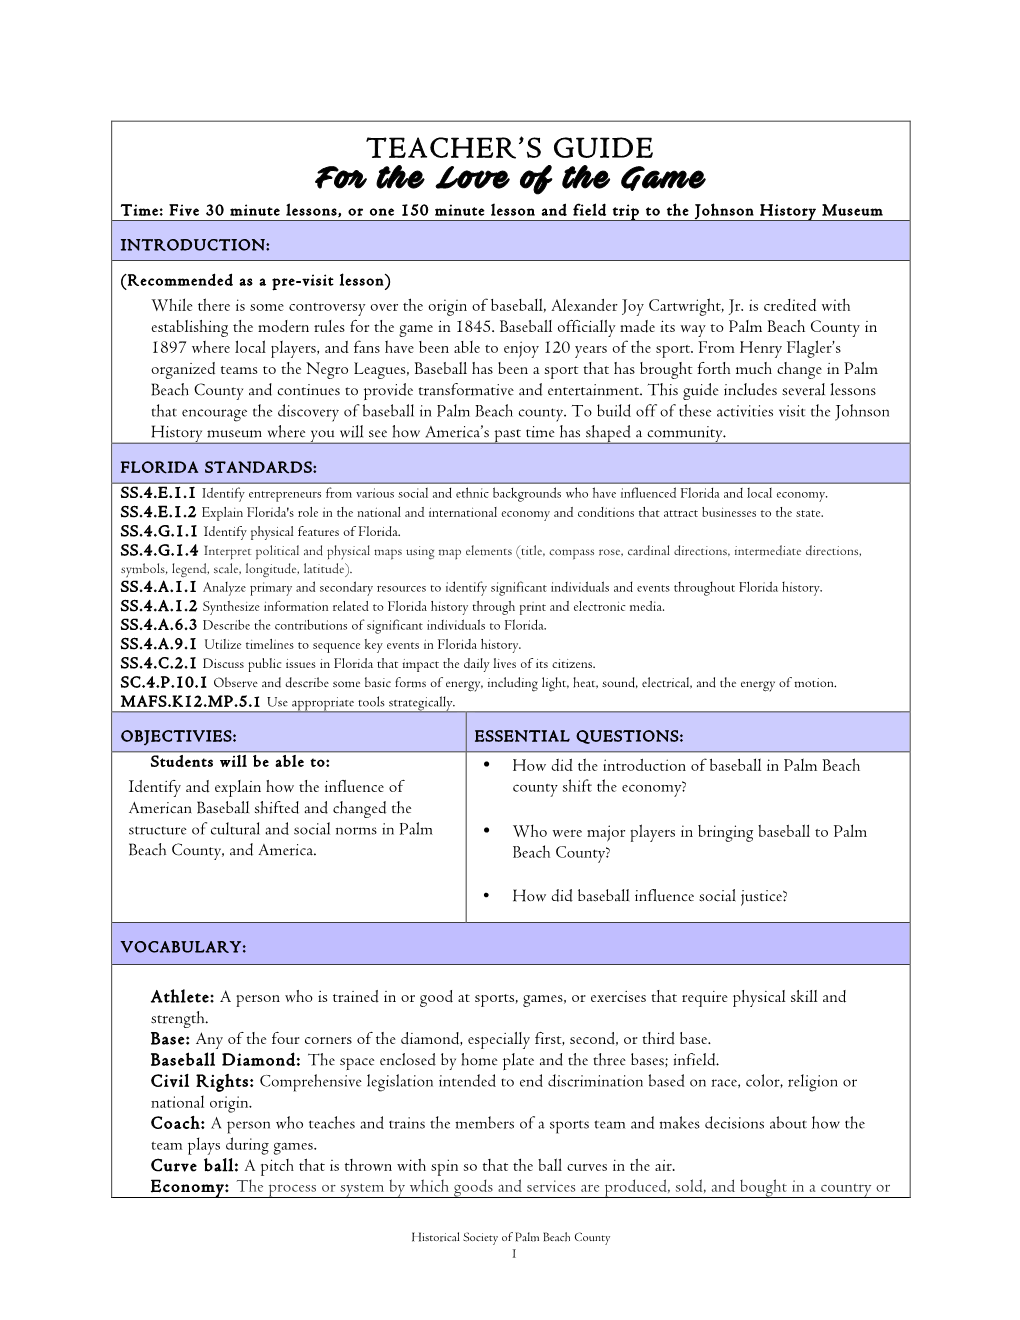 TEACHER's GUIDE for the Love of the Game